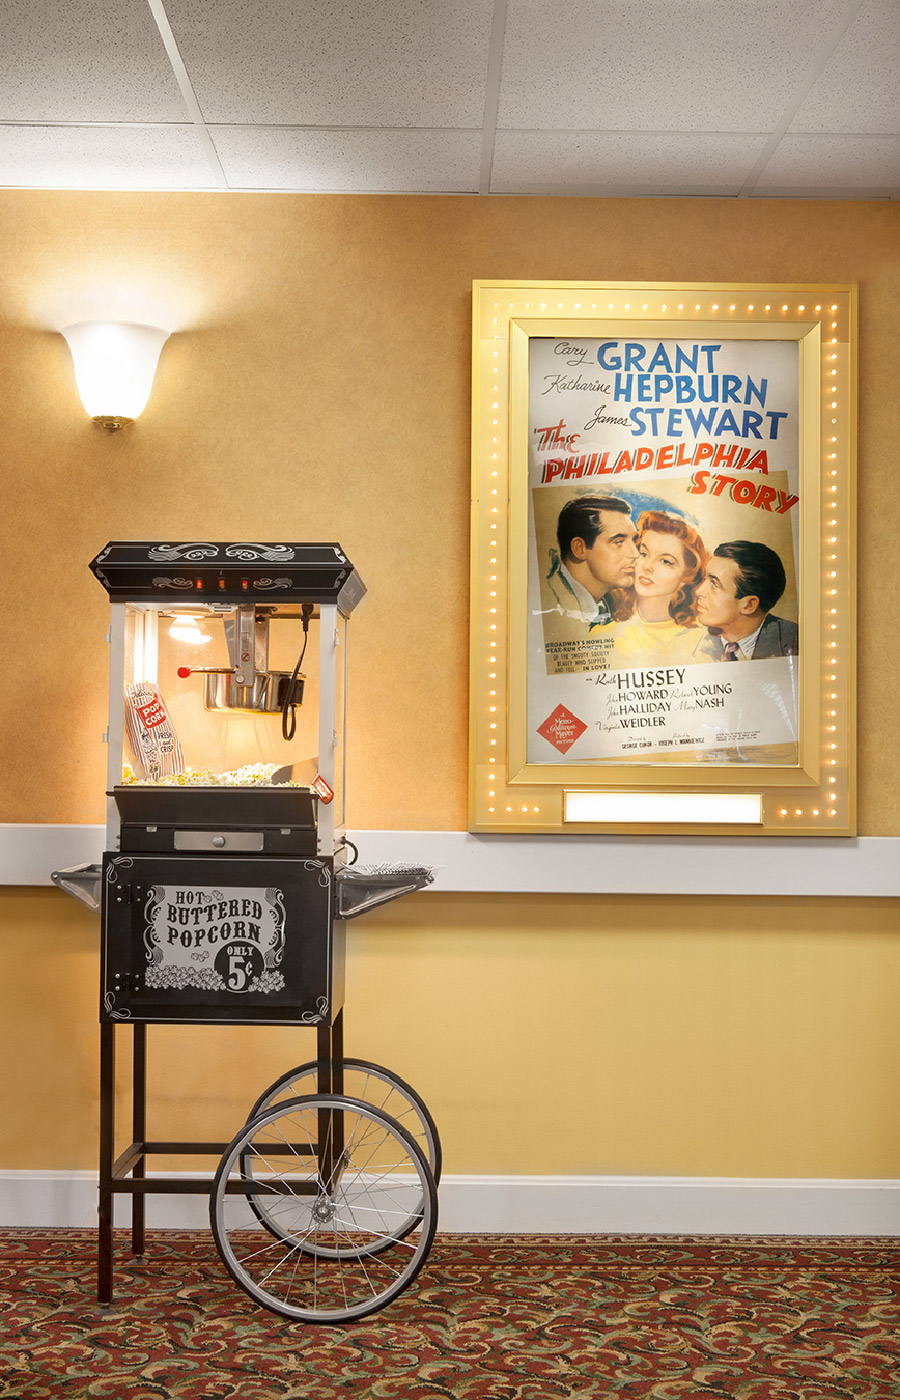 A popcorn machine by a movie poster.